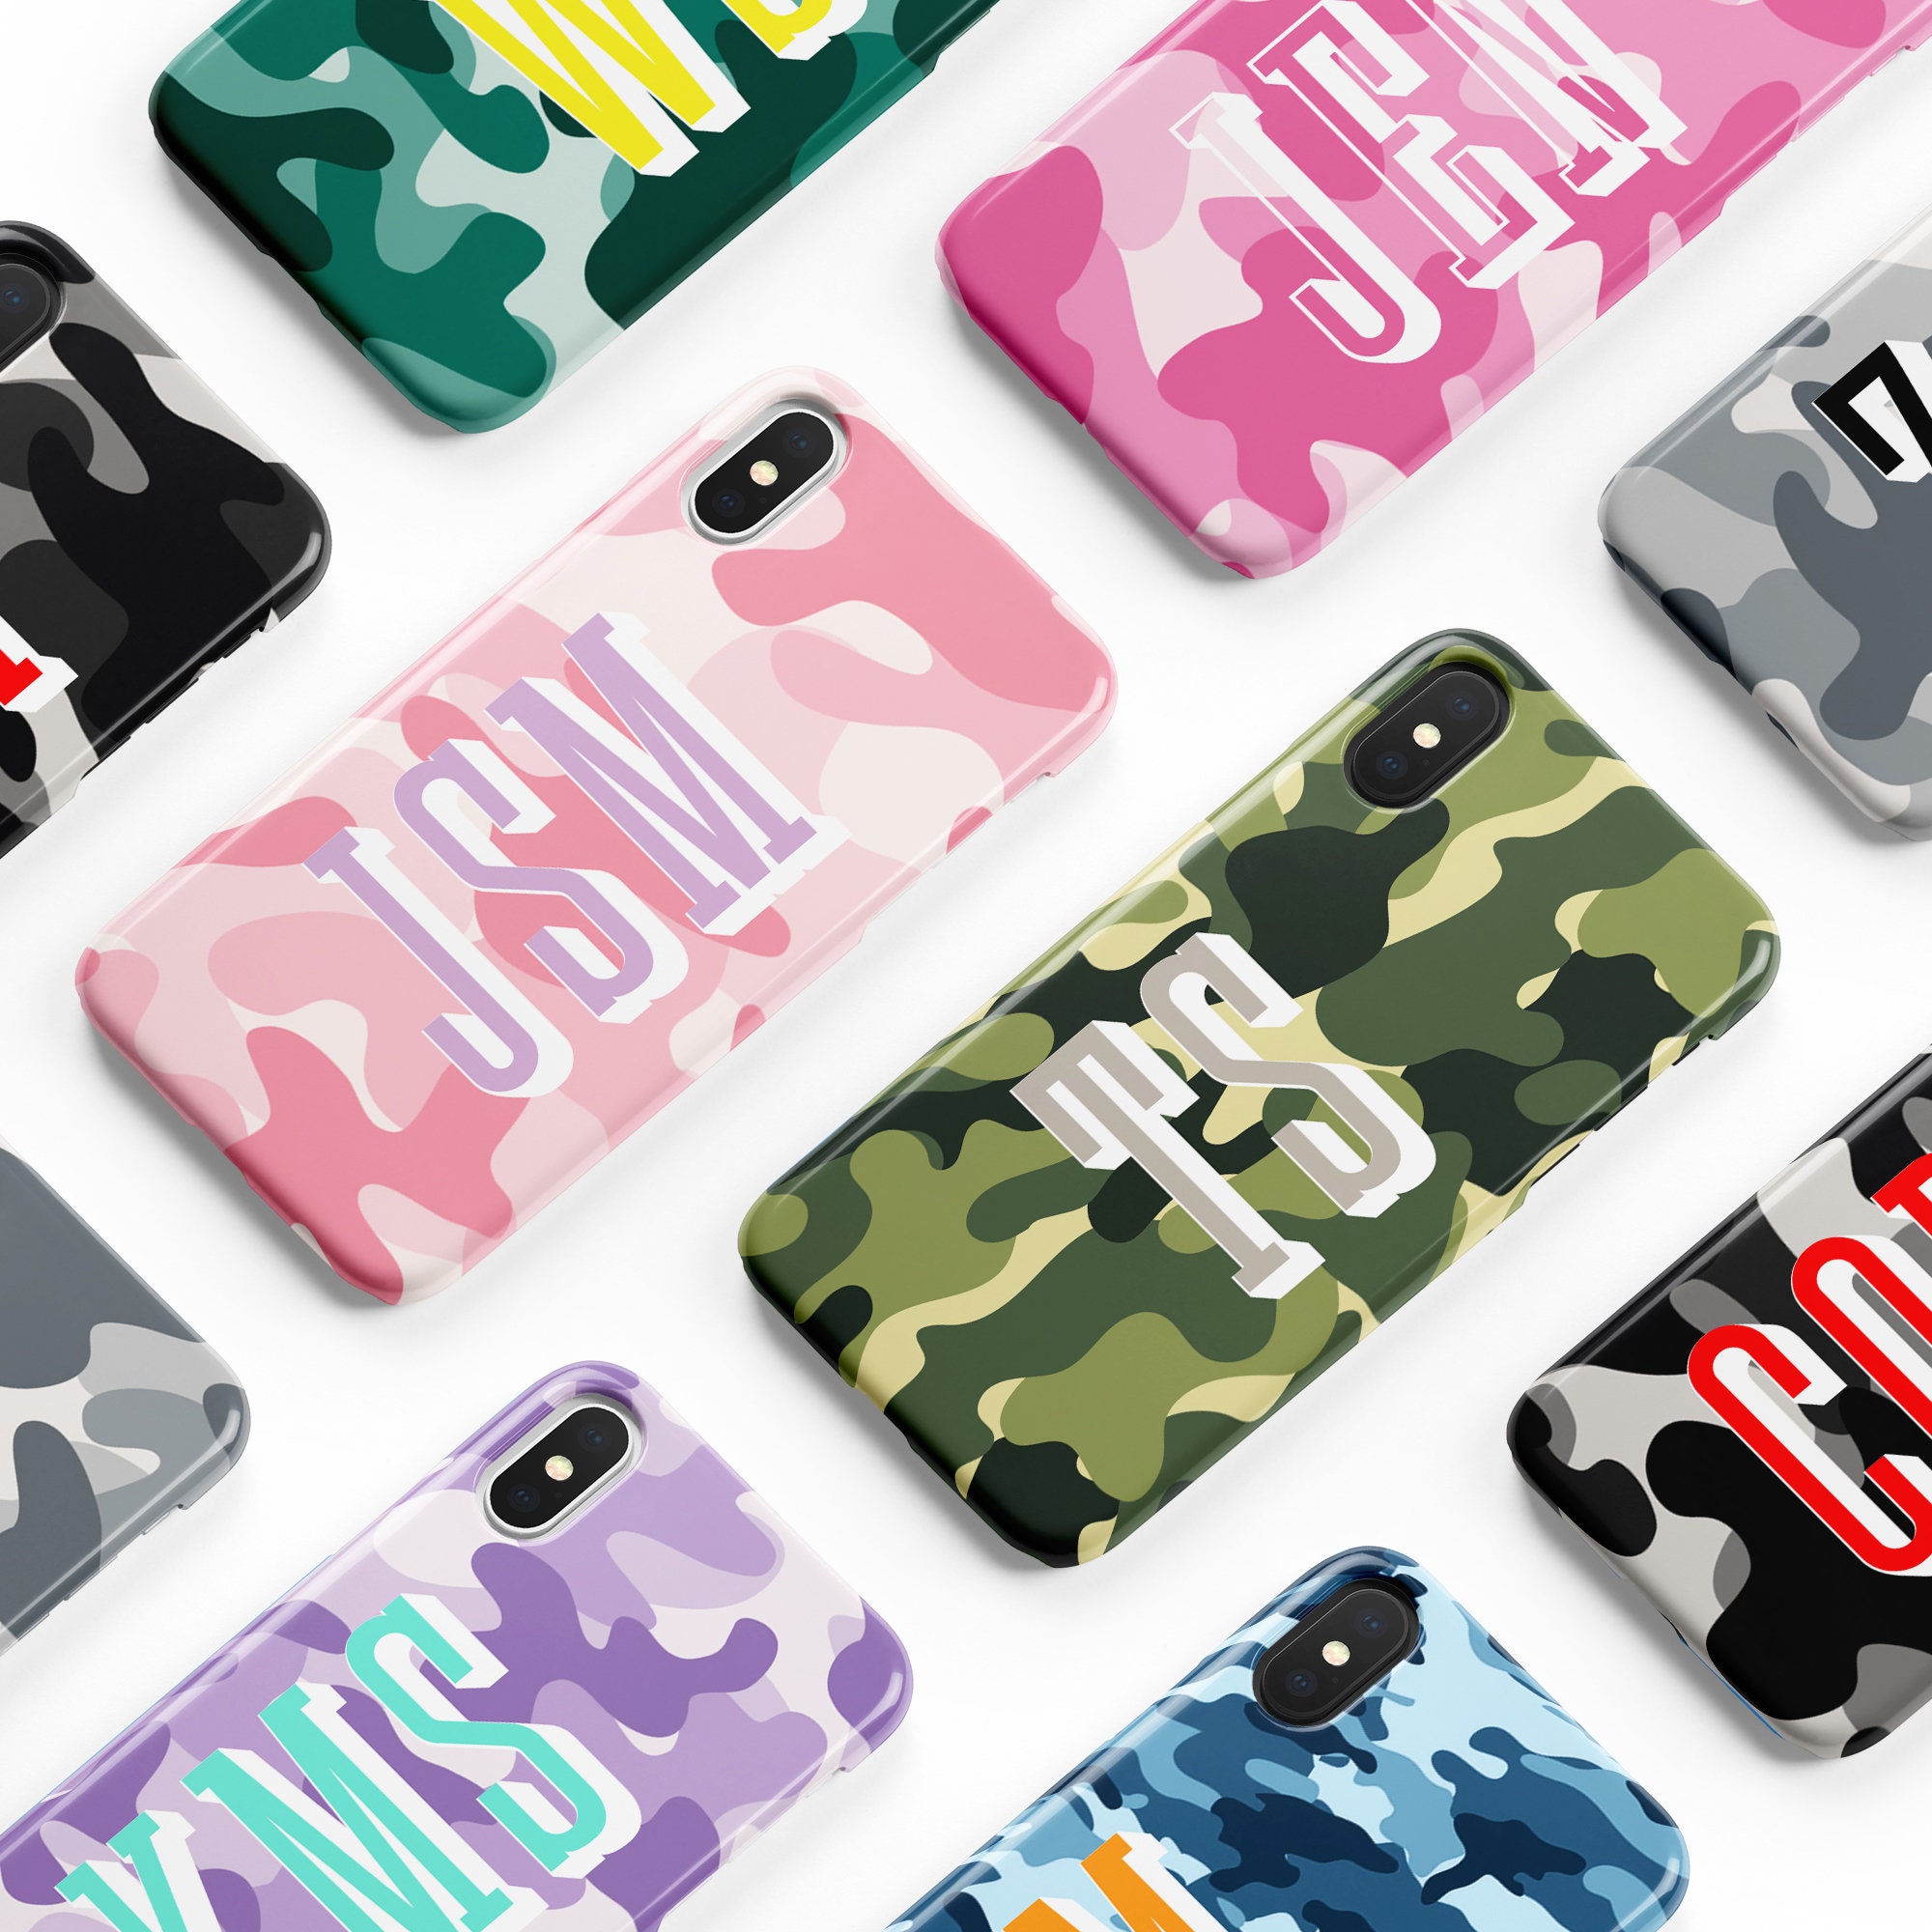 Supreme: iPhone 11 Pro - Protective Case (Pink Camo)